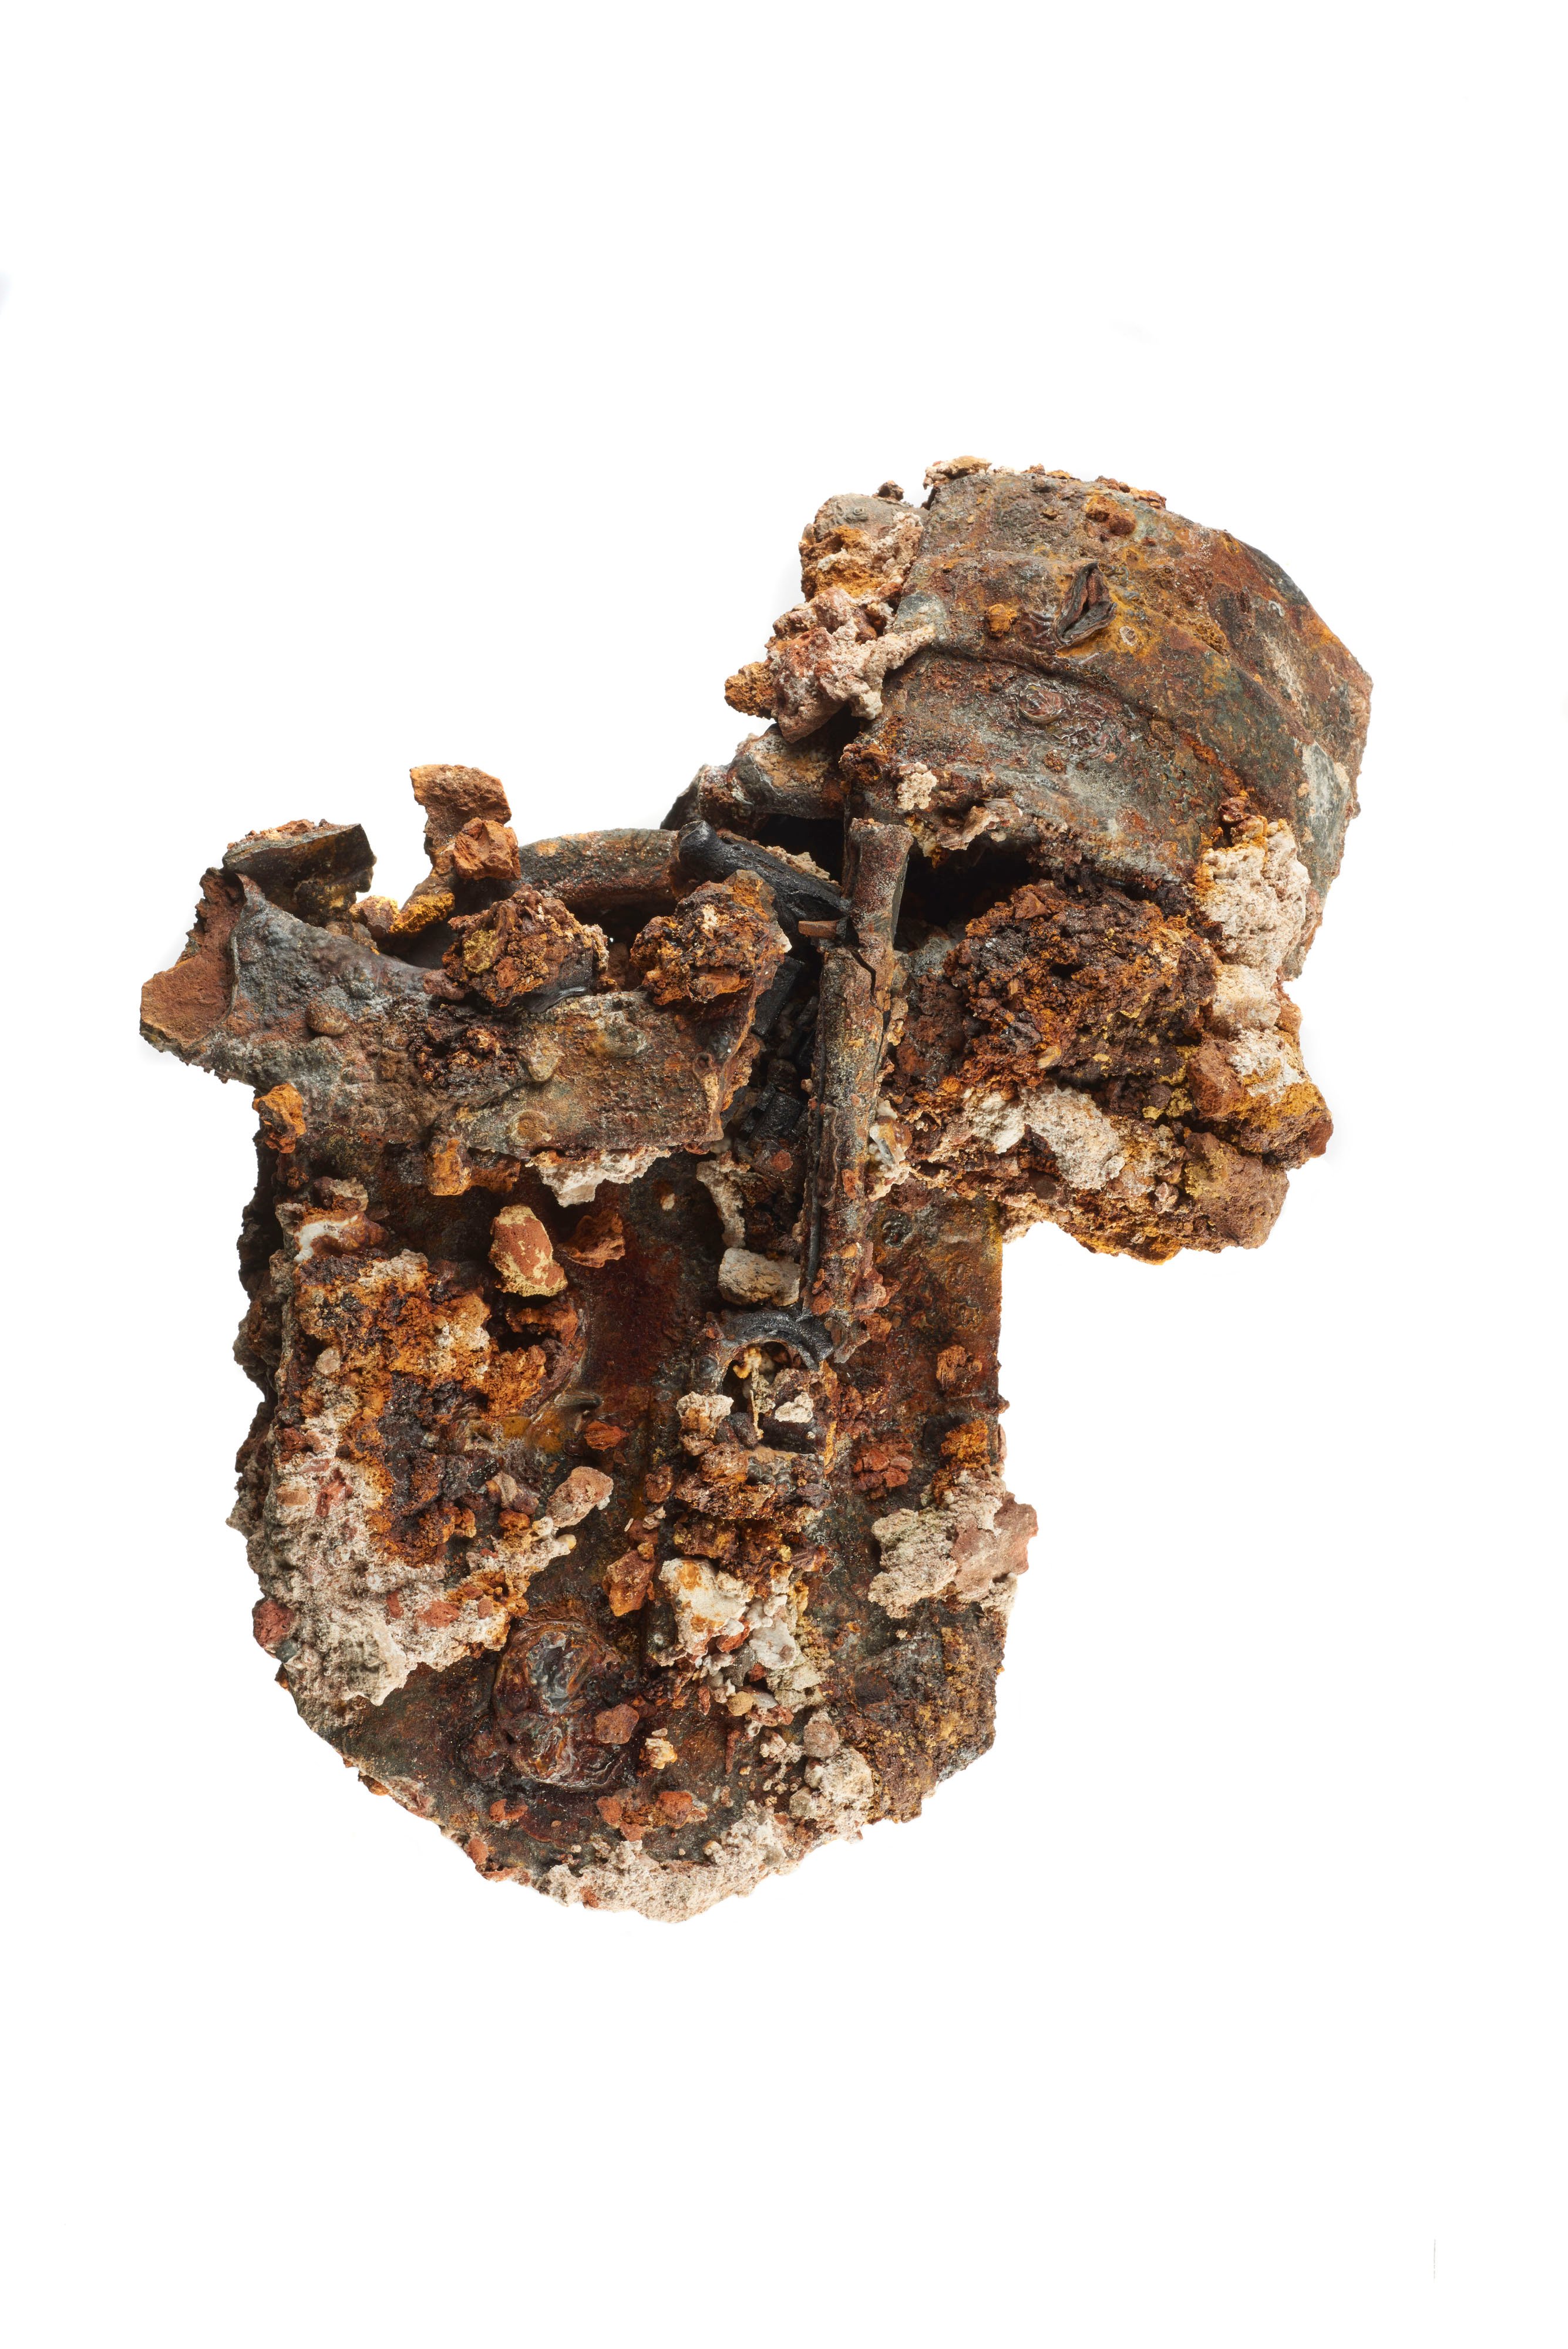 2 iron padlocks and 1 key melted together in a lump during the Great Fire of 1666. museum of London id BPL95[119] This image may be used free of charge for the purpose of promoting or reviewing the Museum of London exhibition ‘Fire! Fire!’ 2016-2017. All other uses must be cleared with the Museum of London picture library.